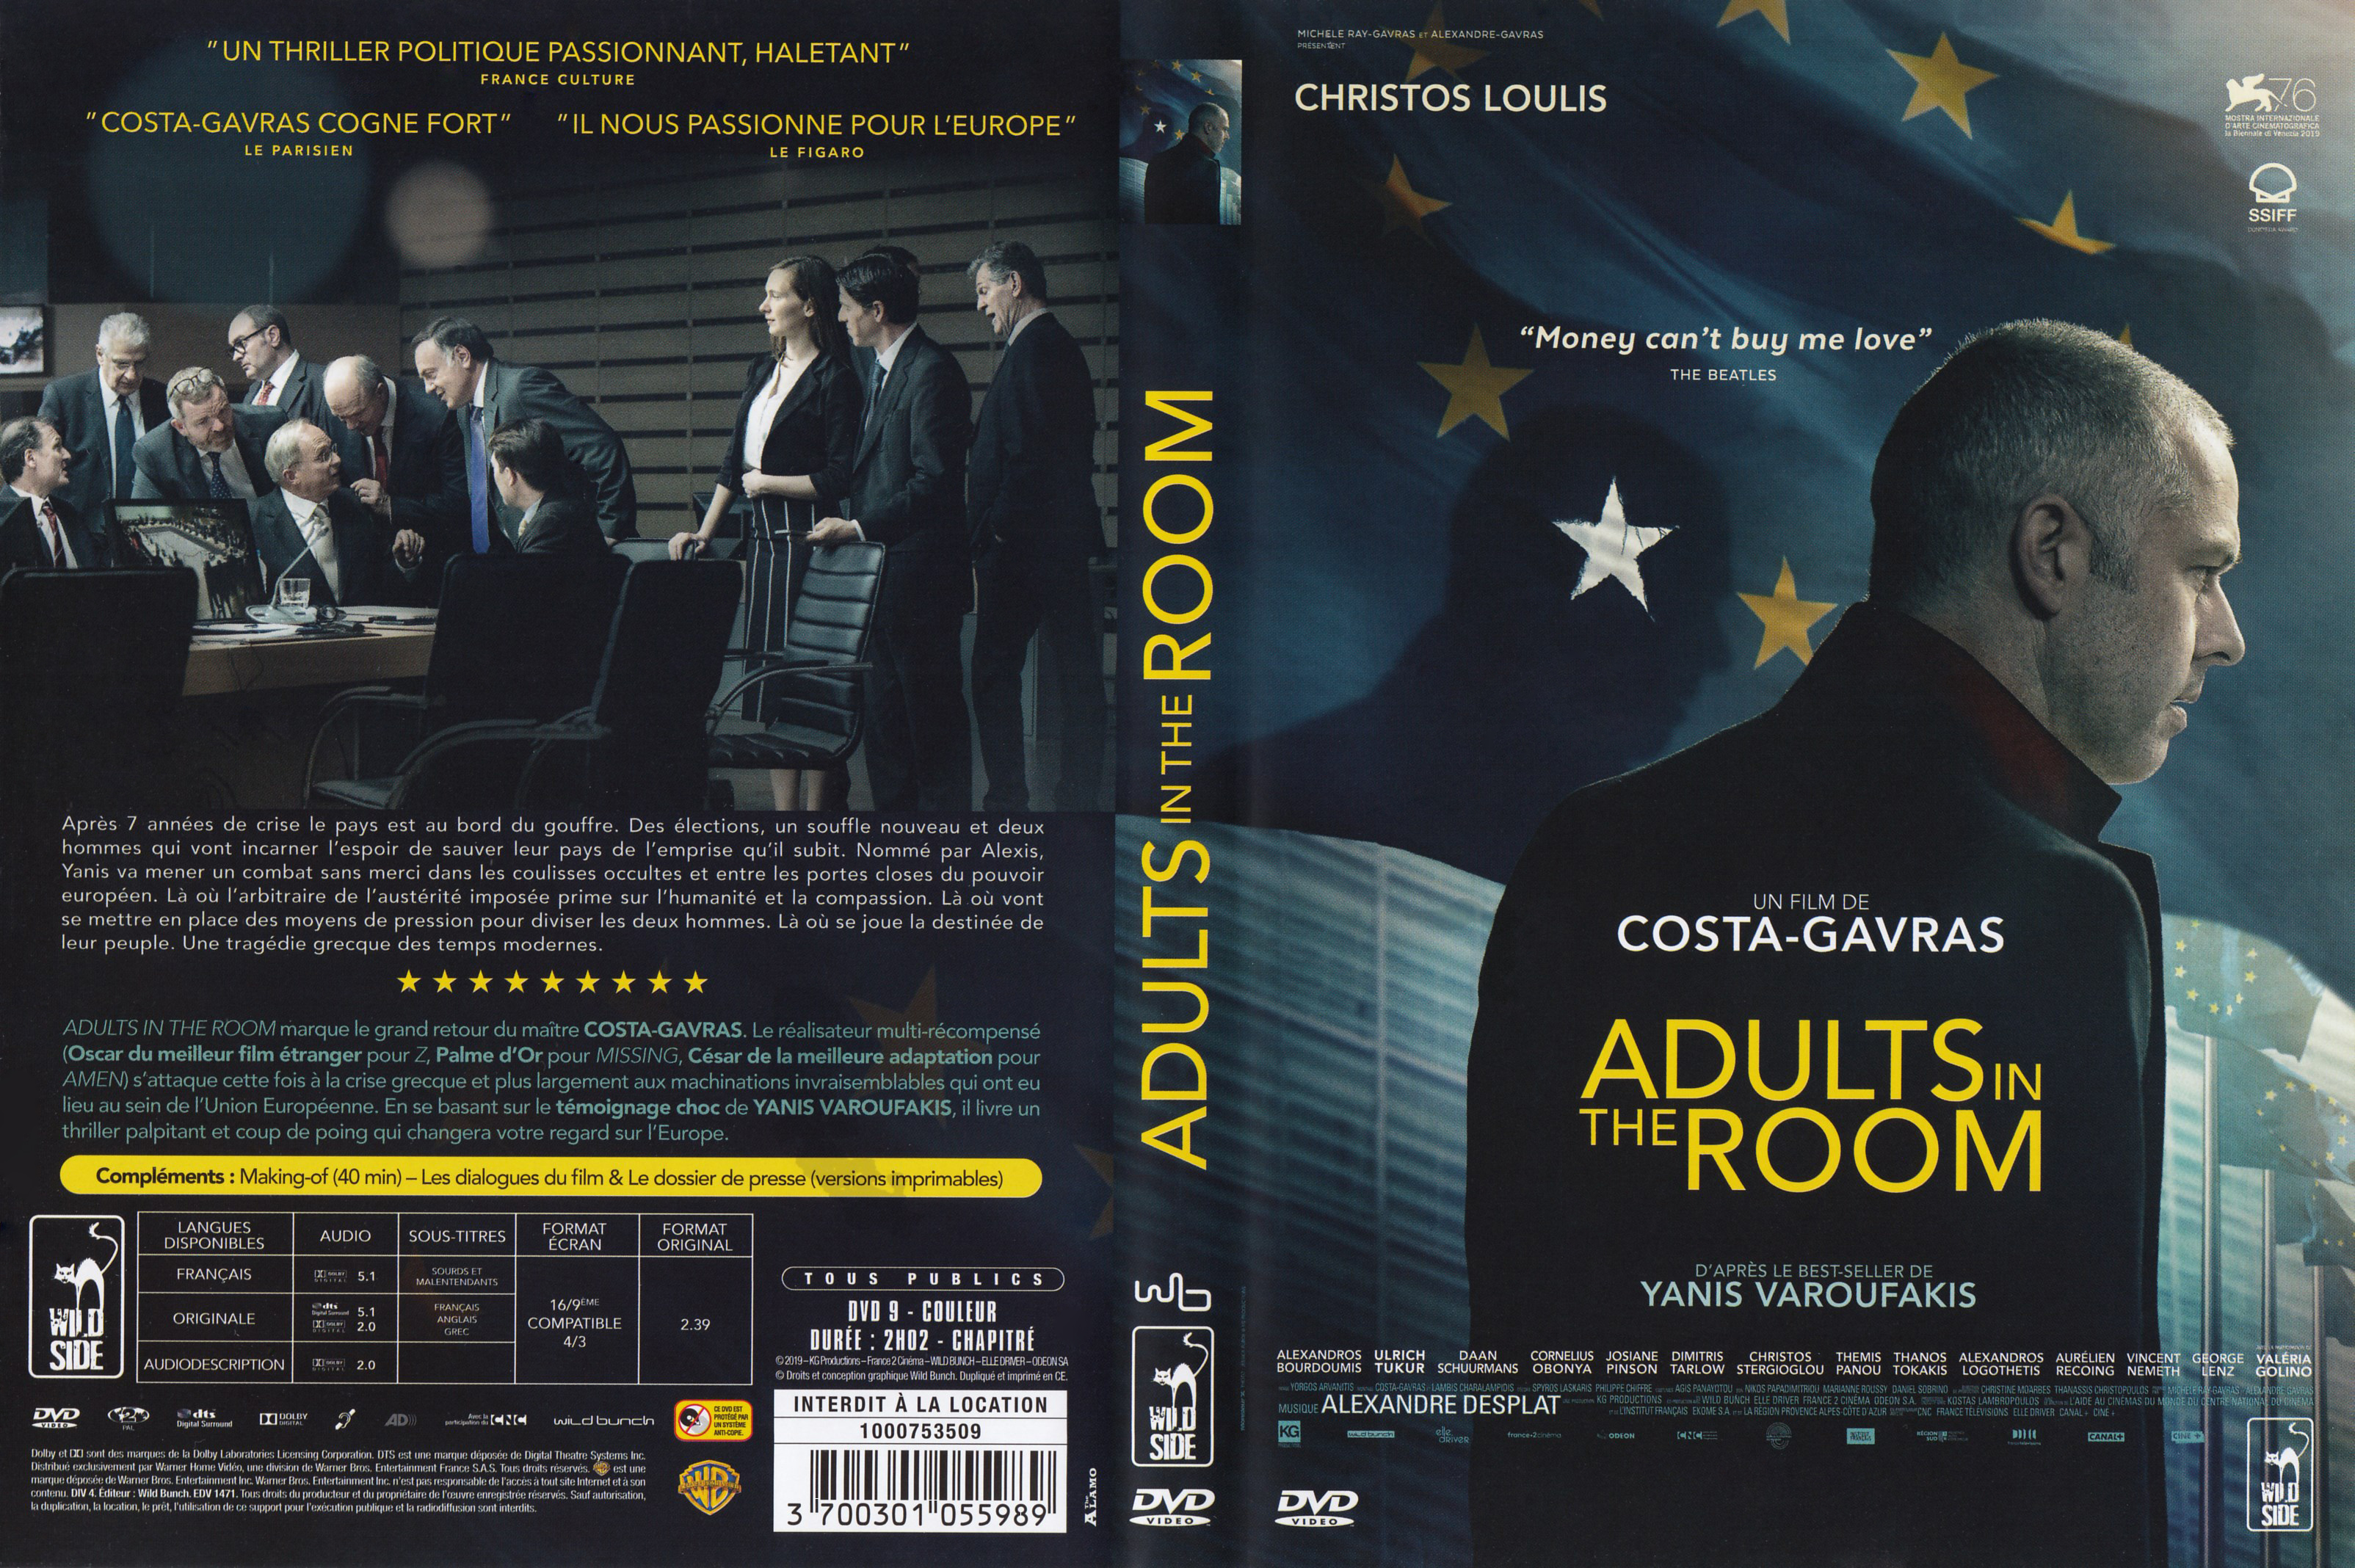 Jaquette DVD Adults in the room